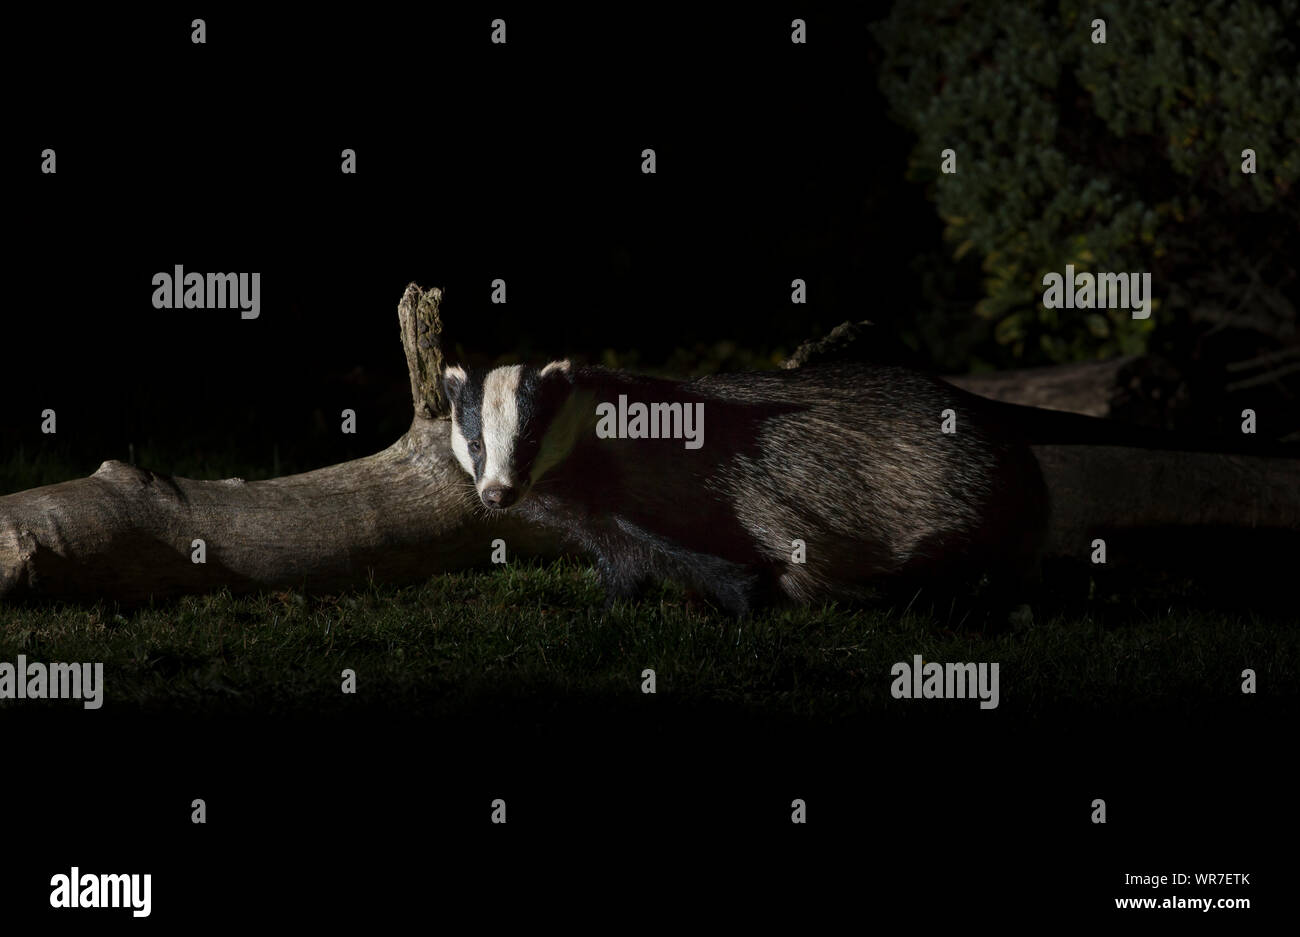 Close up of a wild, urban British badger (Meles meles UK) isolated outdoors in the dark looking up from foraging on ground in a UK garden at night. Stock Photo